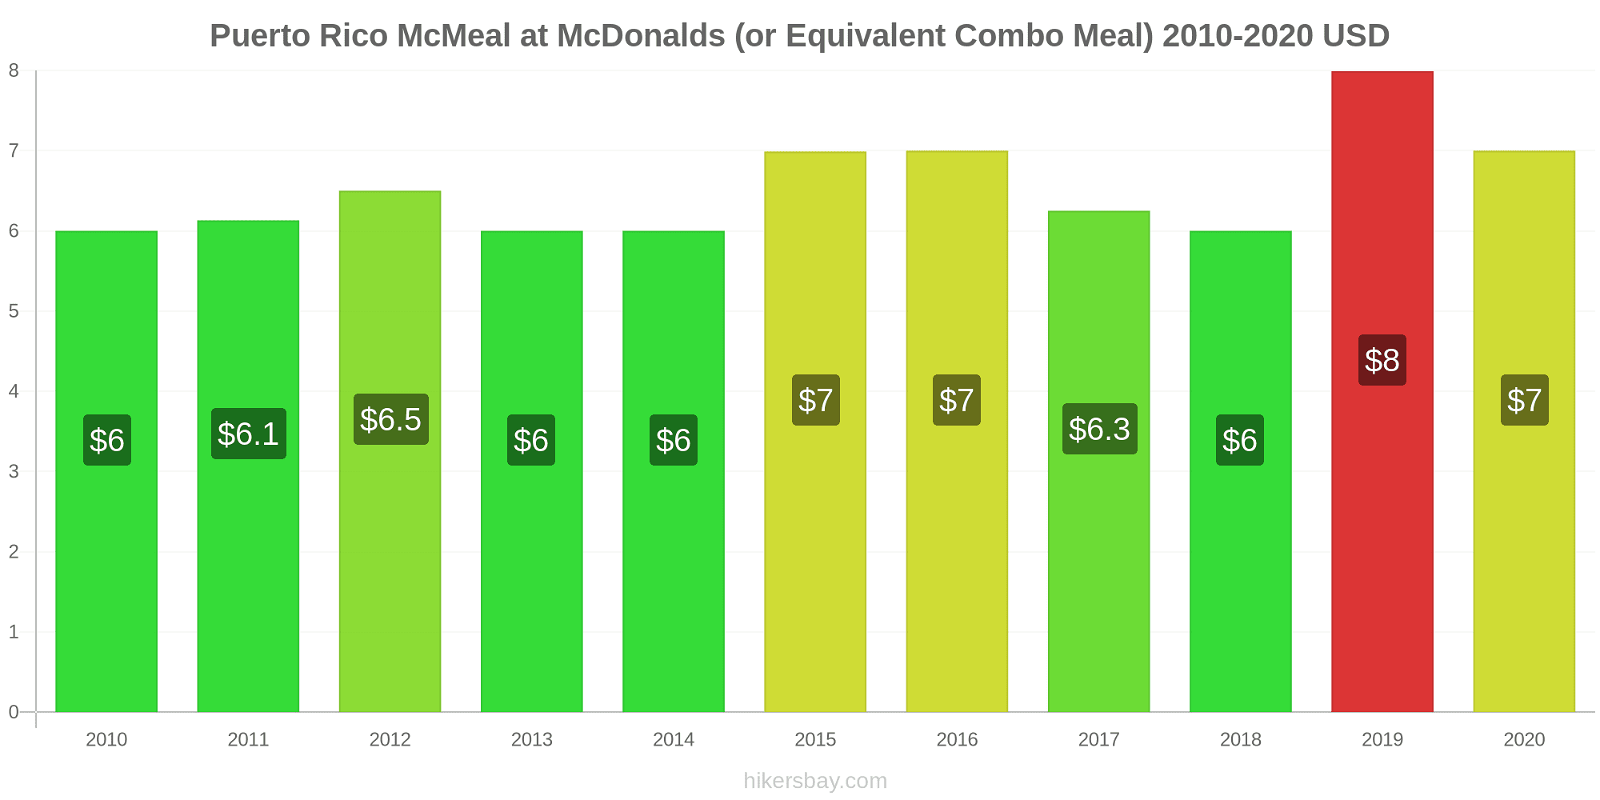 Puerto Rico price changes McMeal at McDonalds (or Equivalent Combo Meal) hikersbay.com